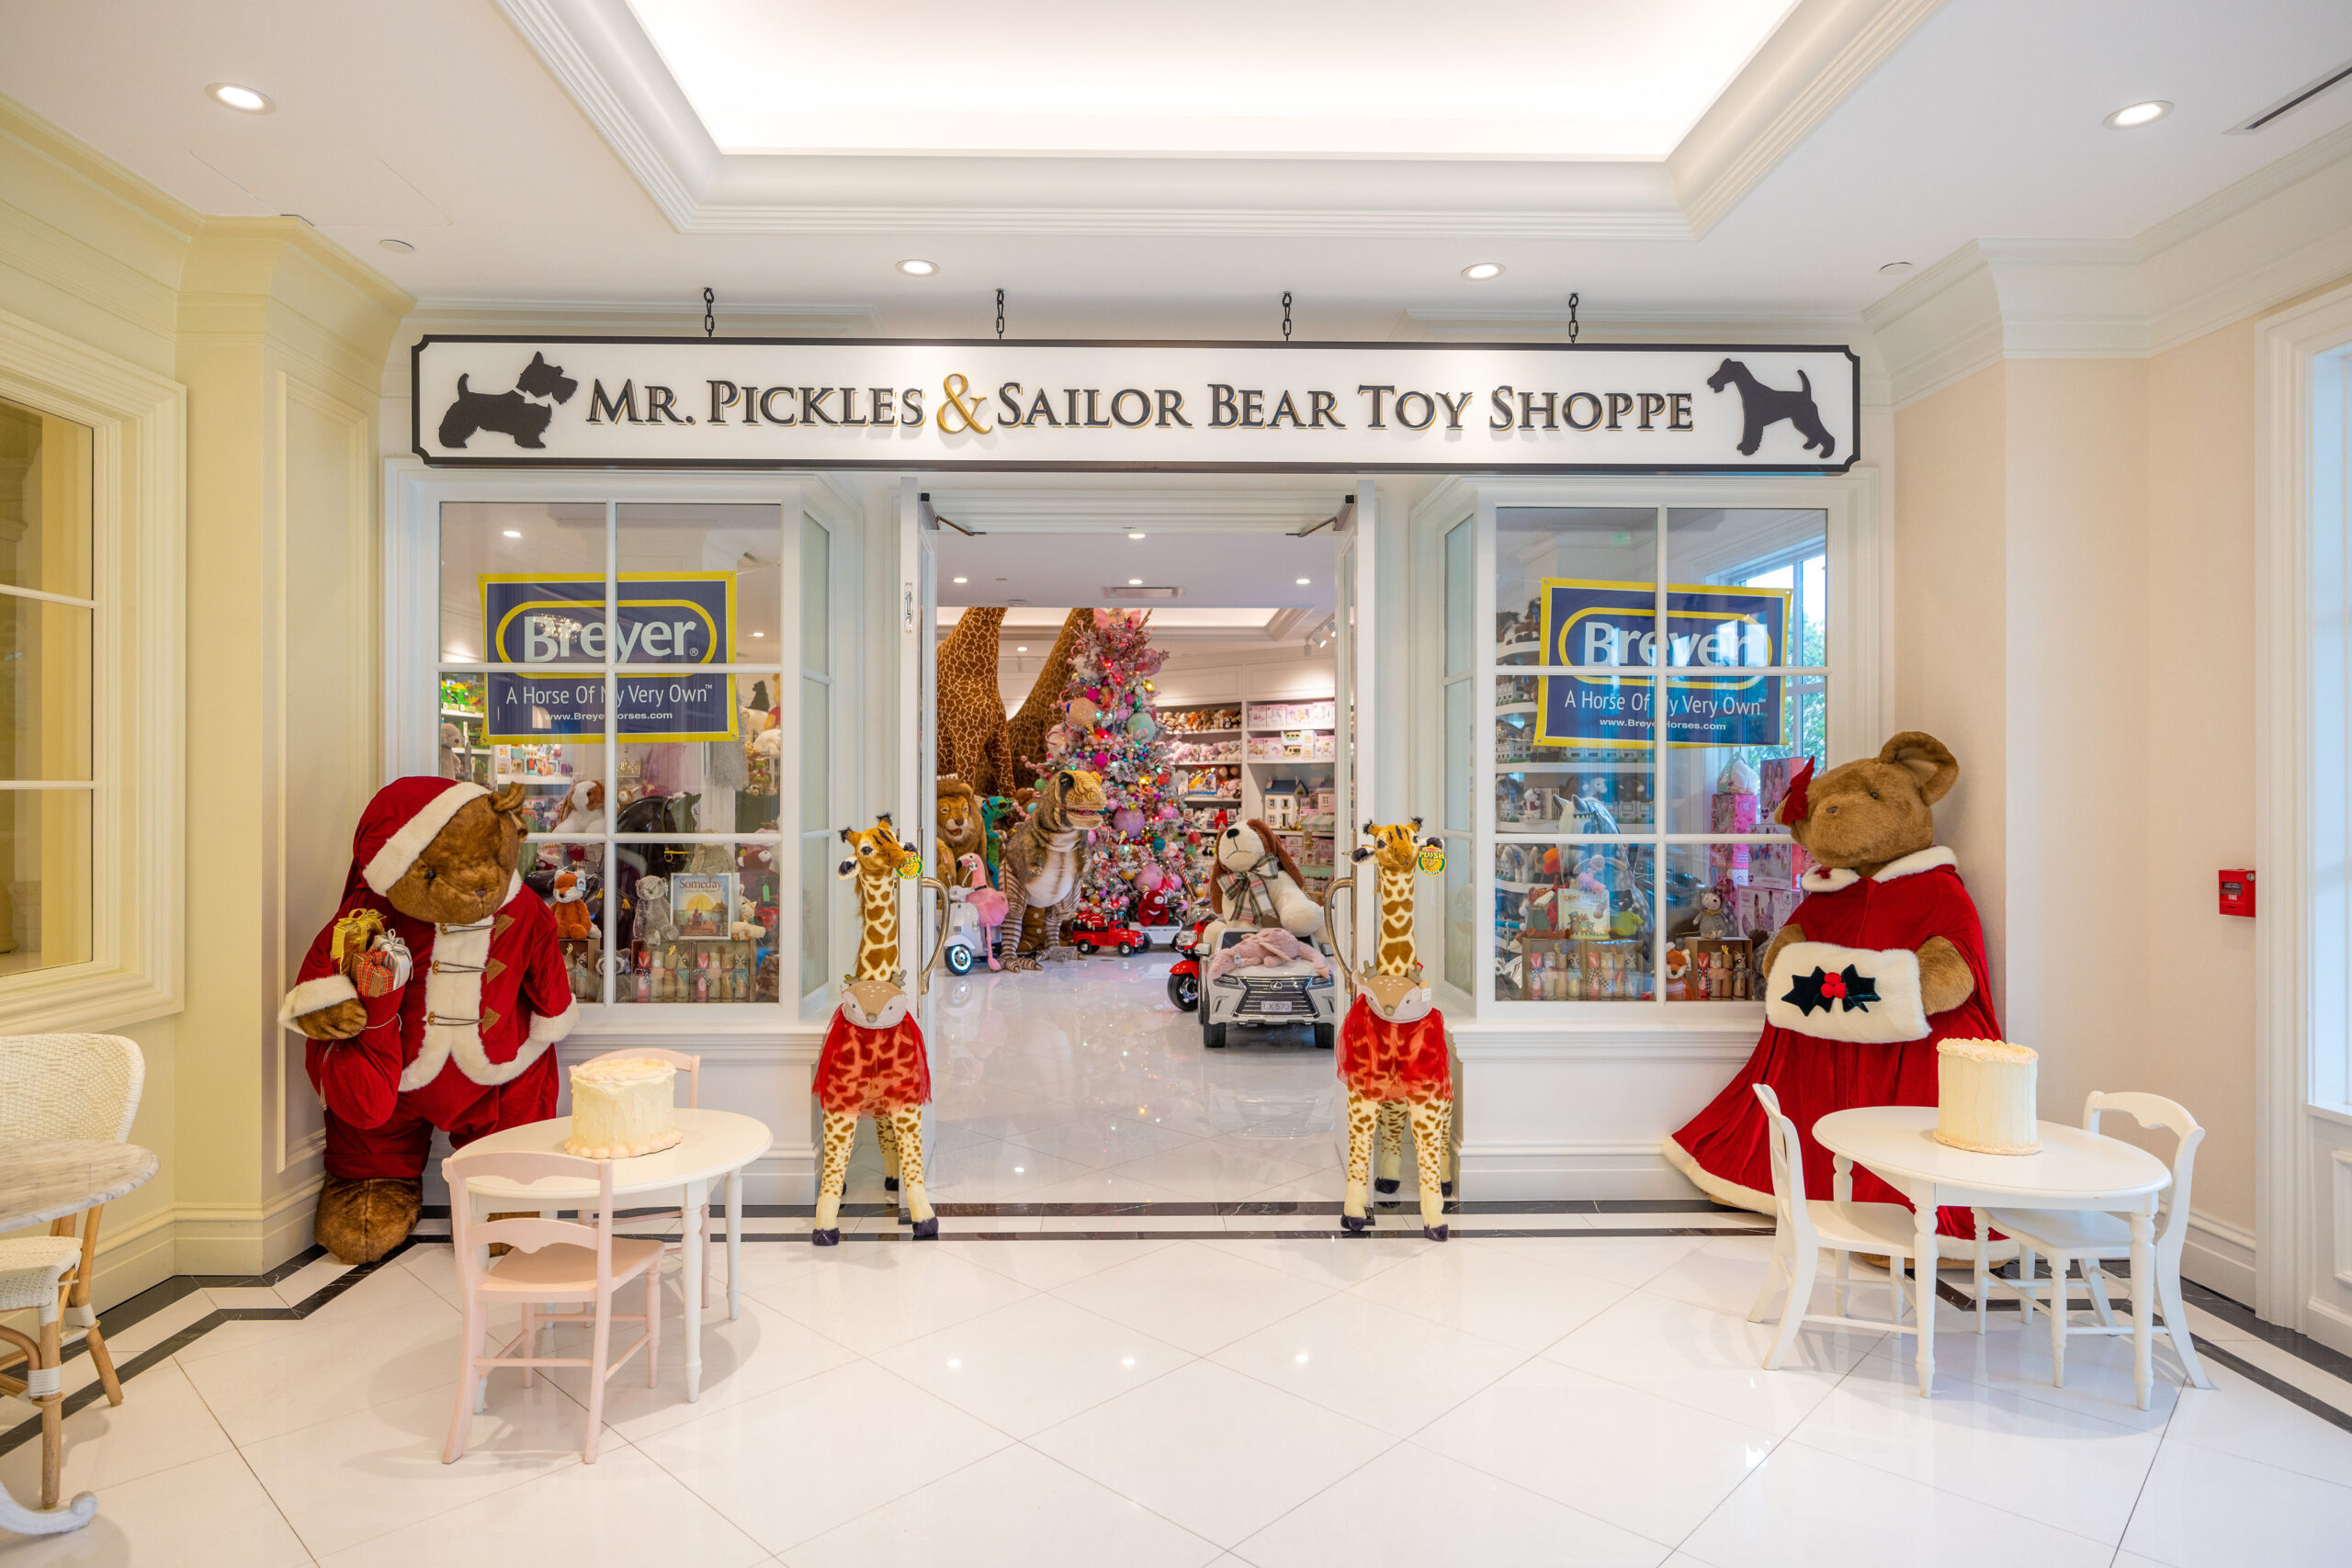 Mr. Pickles & Sailor Bear Toy Shoppe in Ocala